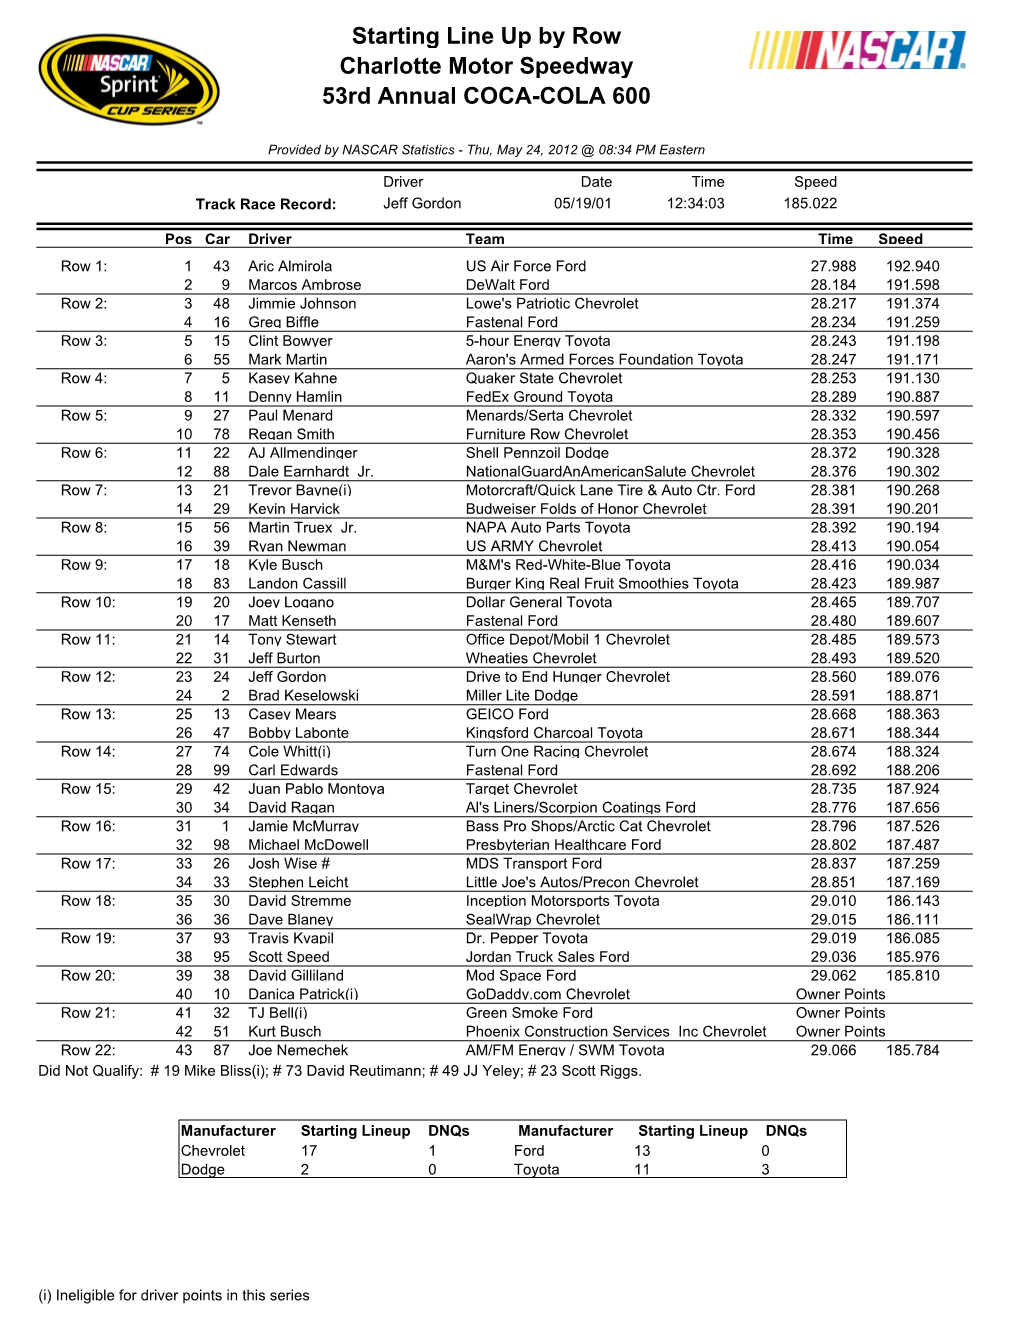 Starting Line up by Row Charlotte Motor Speedway 53Rd Annual COCA-COLA 600